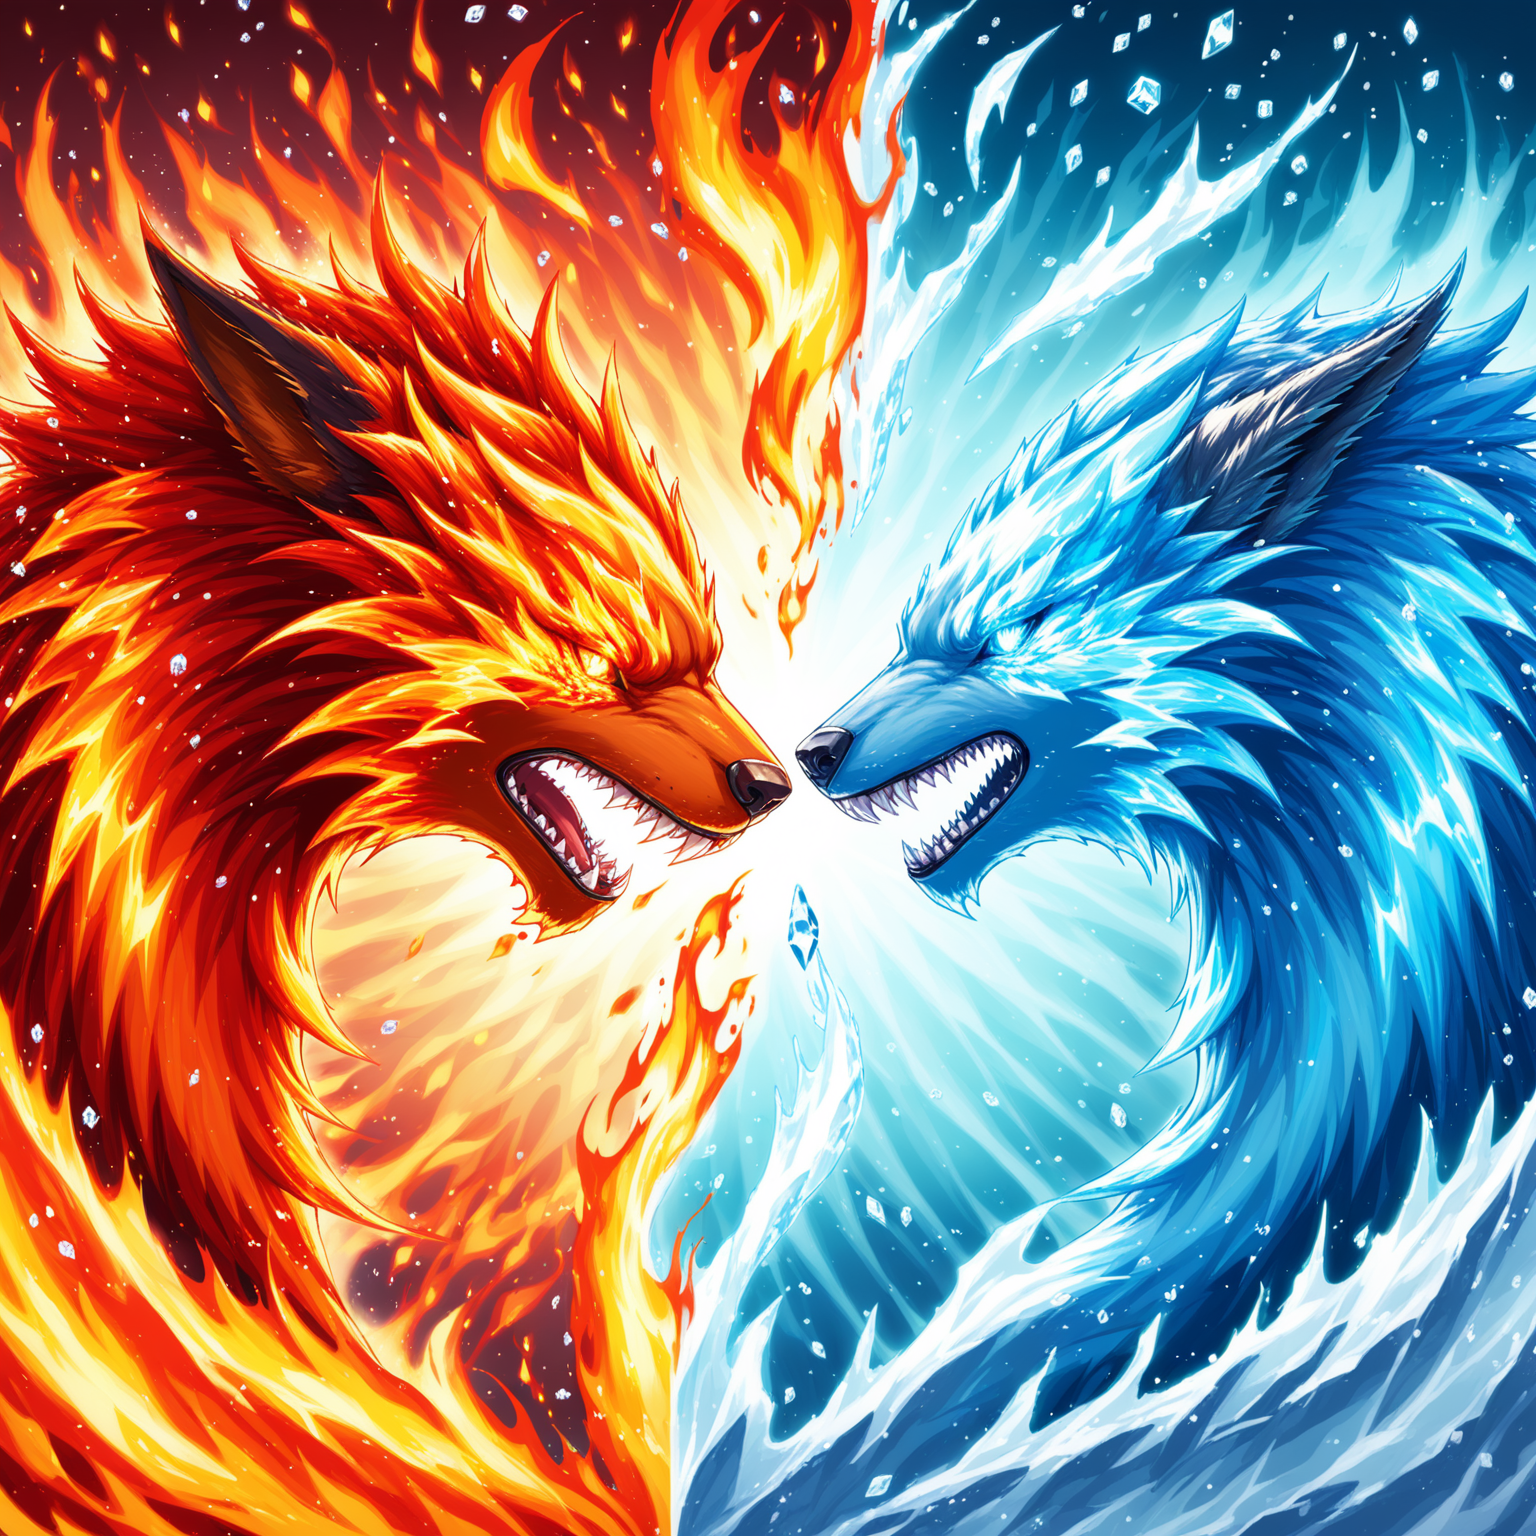 Fiery Battle Clash of Fire and Ice